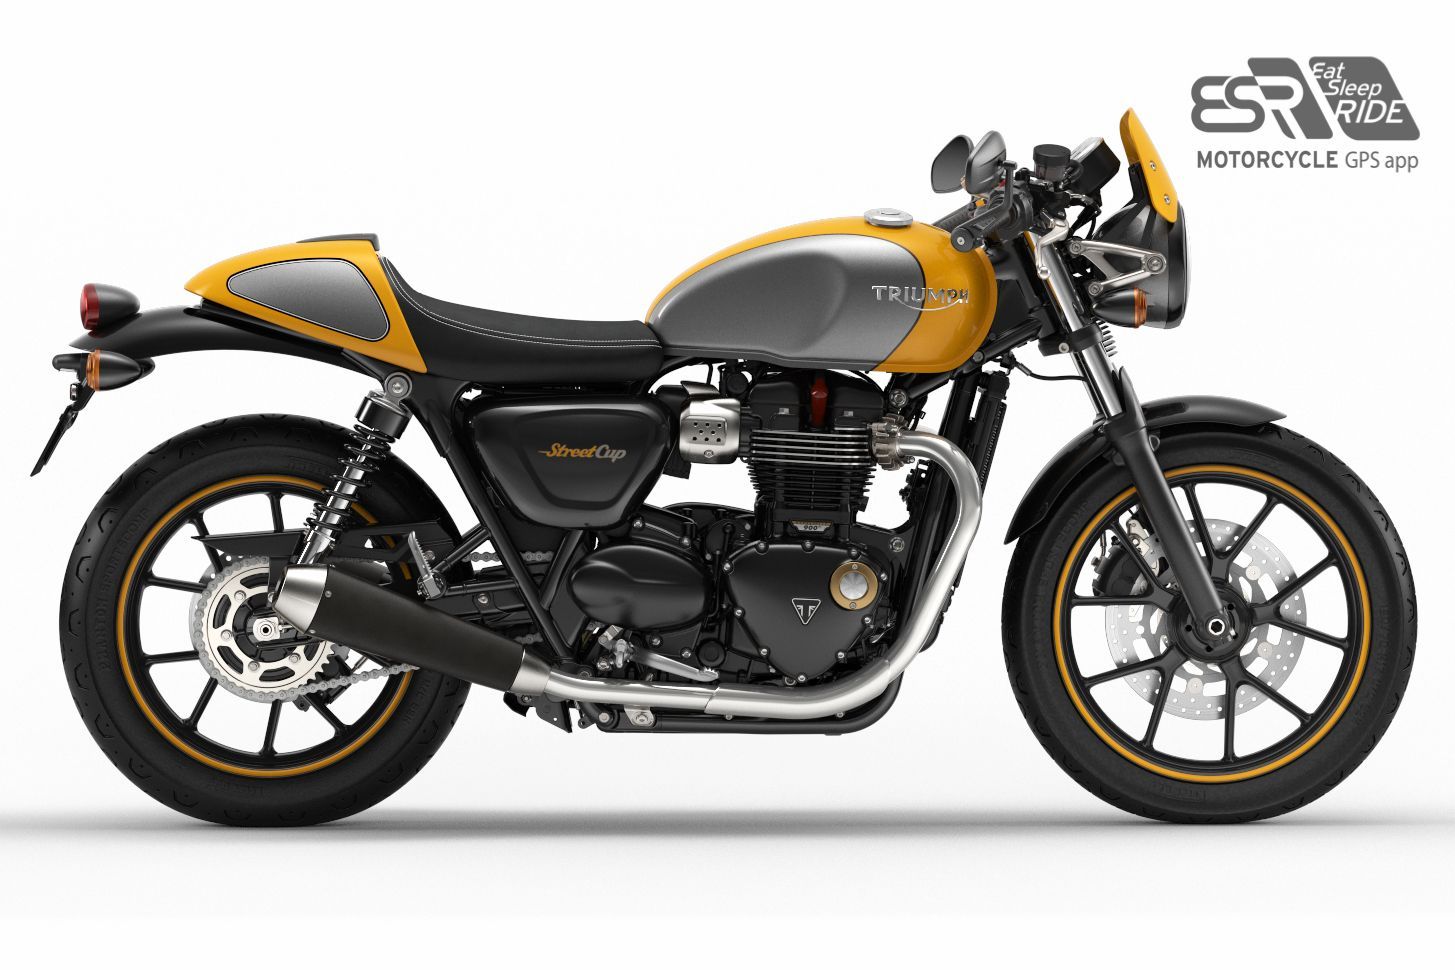 TRIUMPH 2017 RACING YELLOW STREET CUP launched at INTERMOT